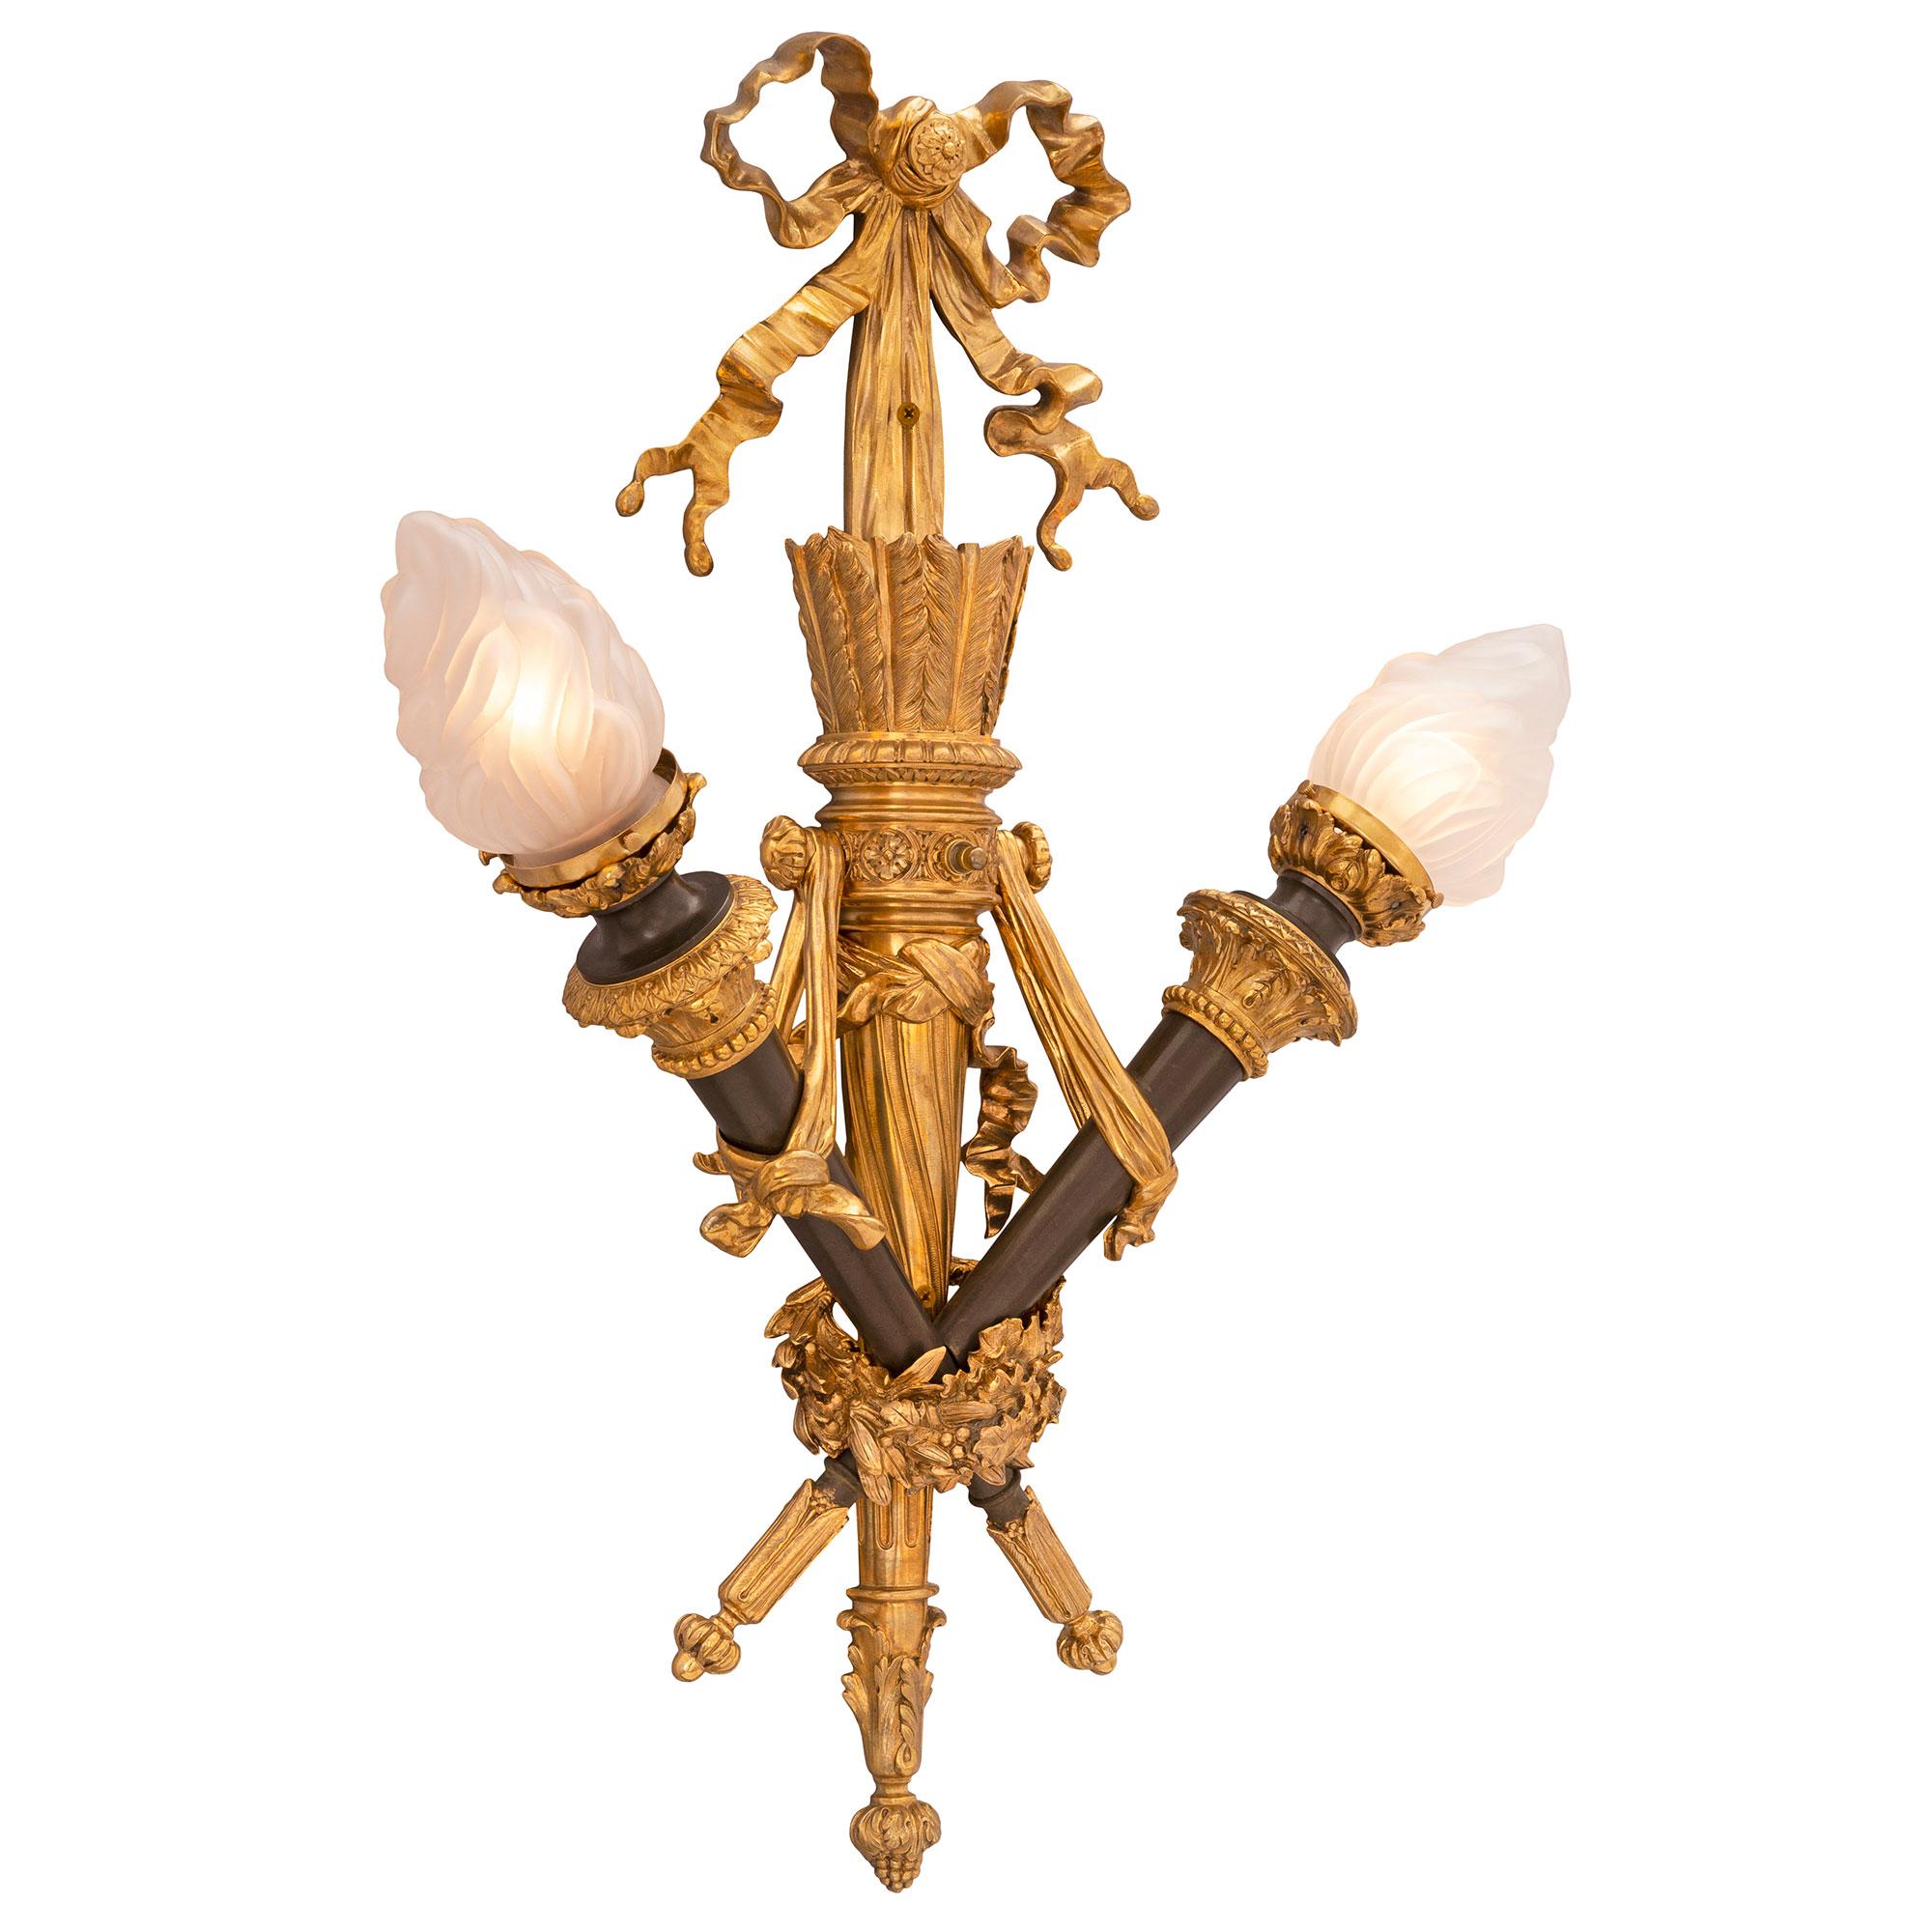 A superb pair of French 19th century Louis XVI style ormolu and patinated bronze sconces. Each two arm sconce is centered by a beautiful bottom acorn finial amidst large acanthus leaves. At the centers are crossed torches of the eternal flames each